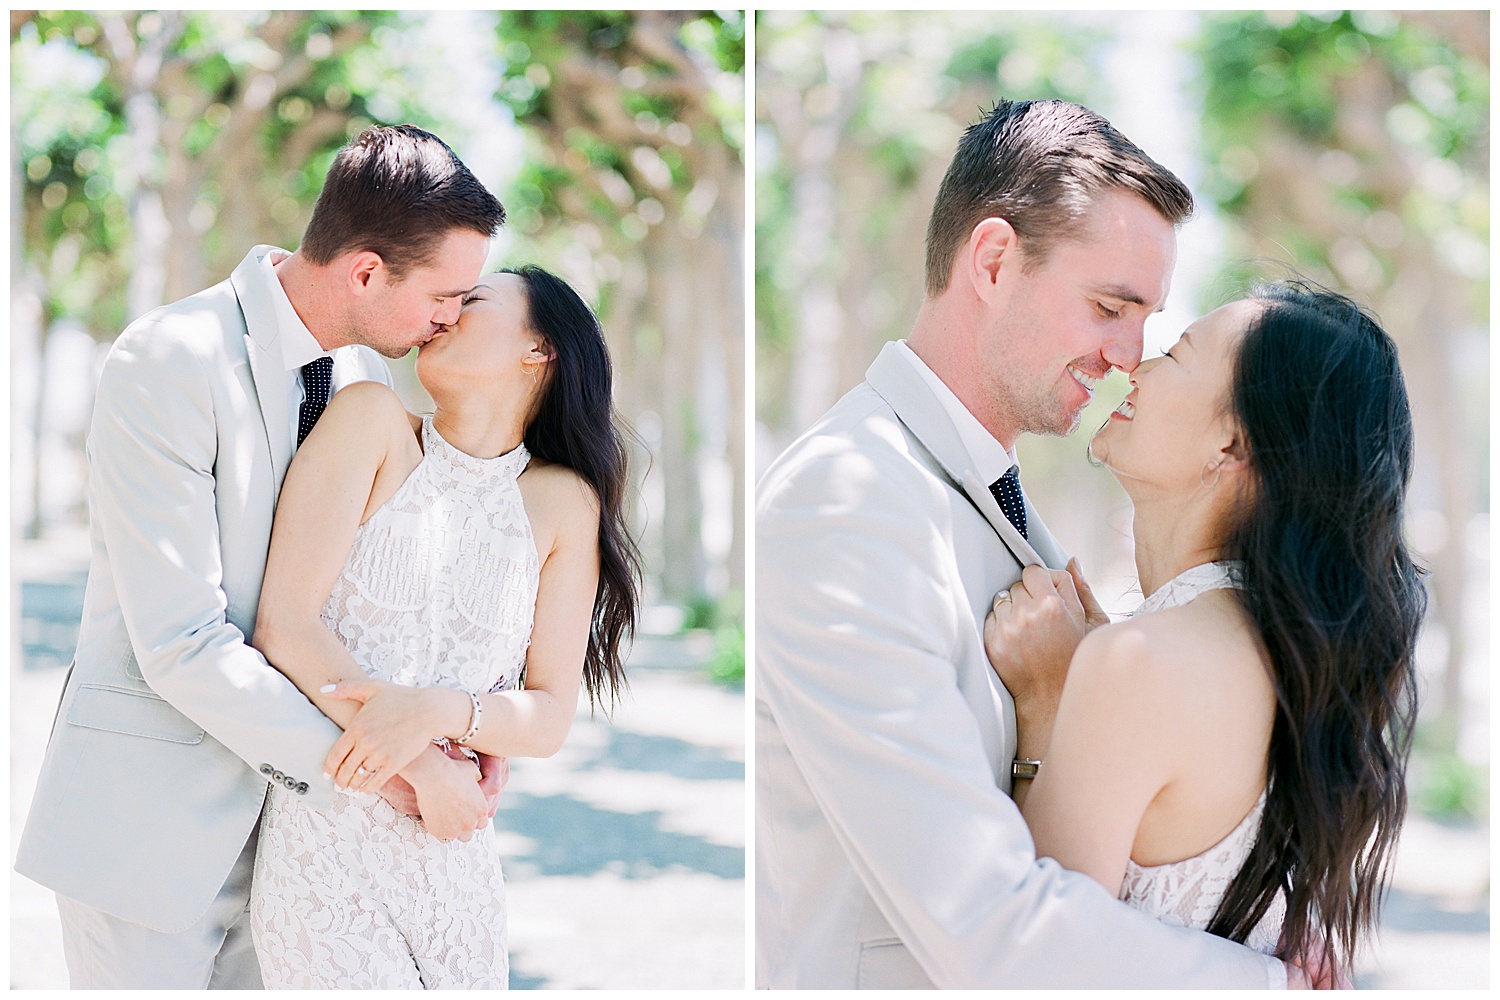 married couple embracing each other after elopement